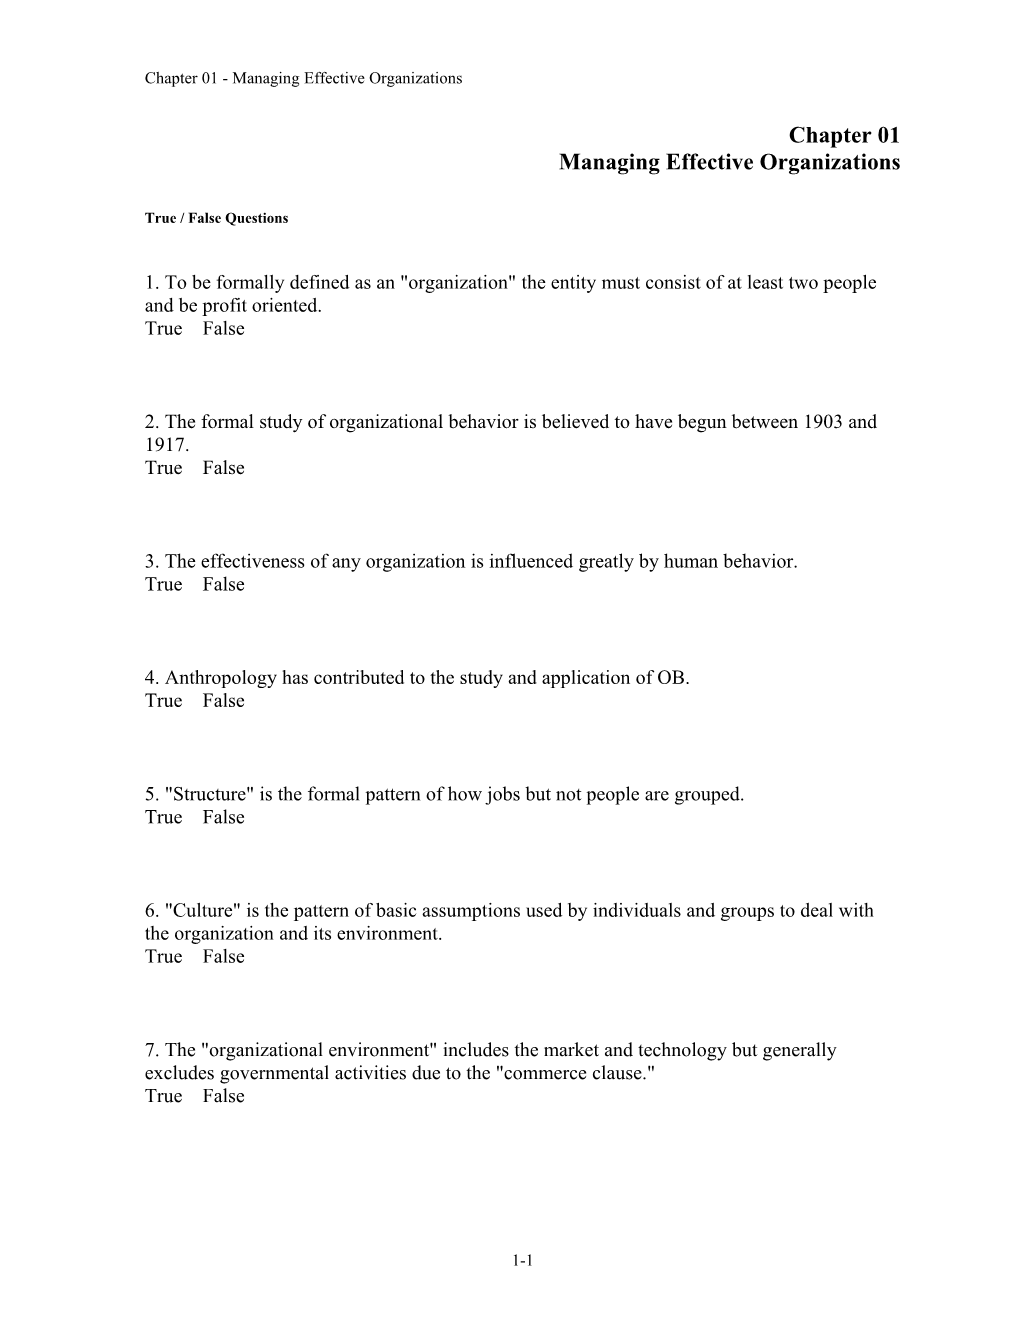 Chapter 01 Managing Effective Organizations